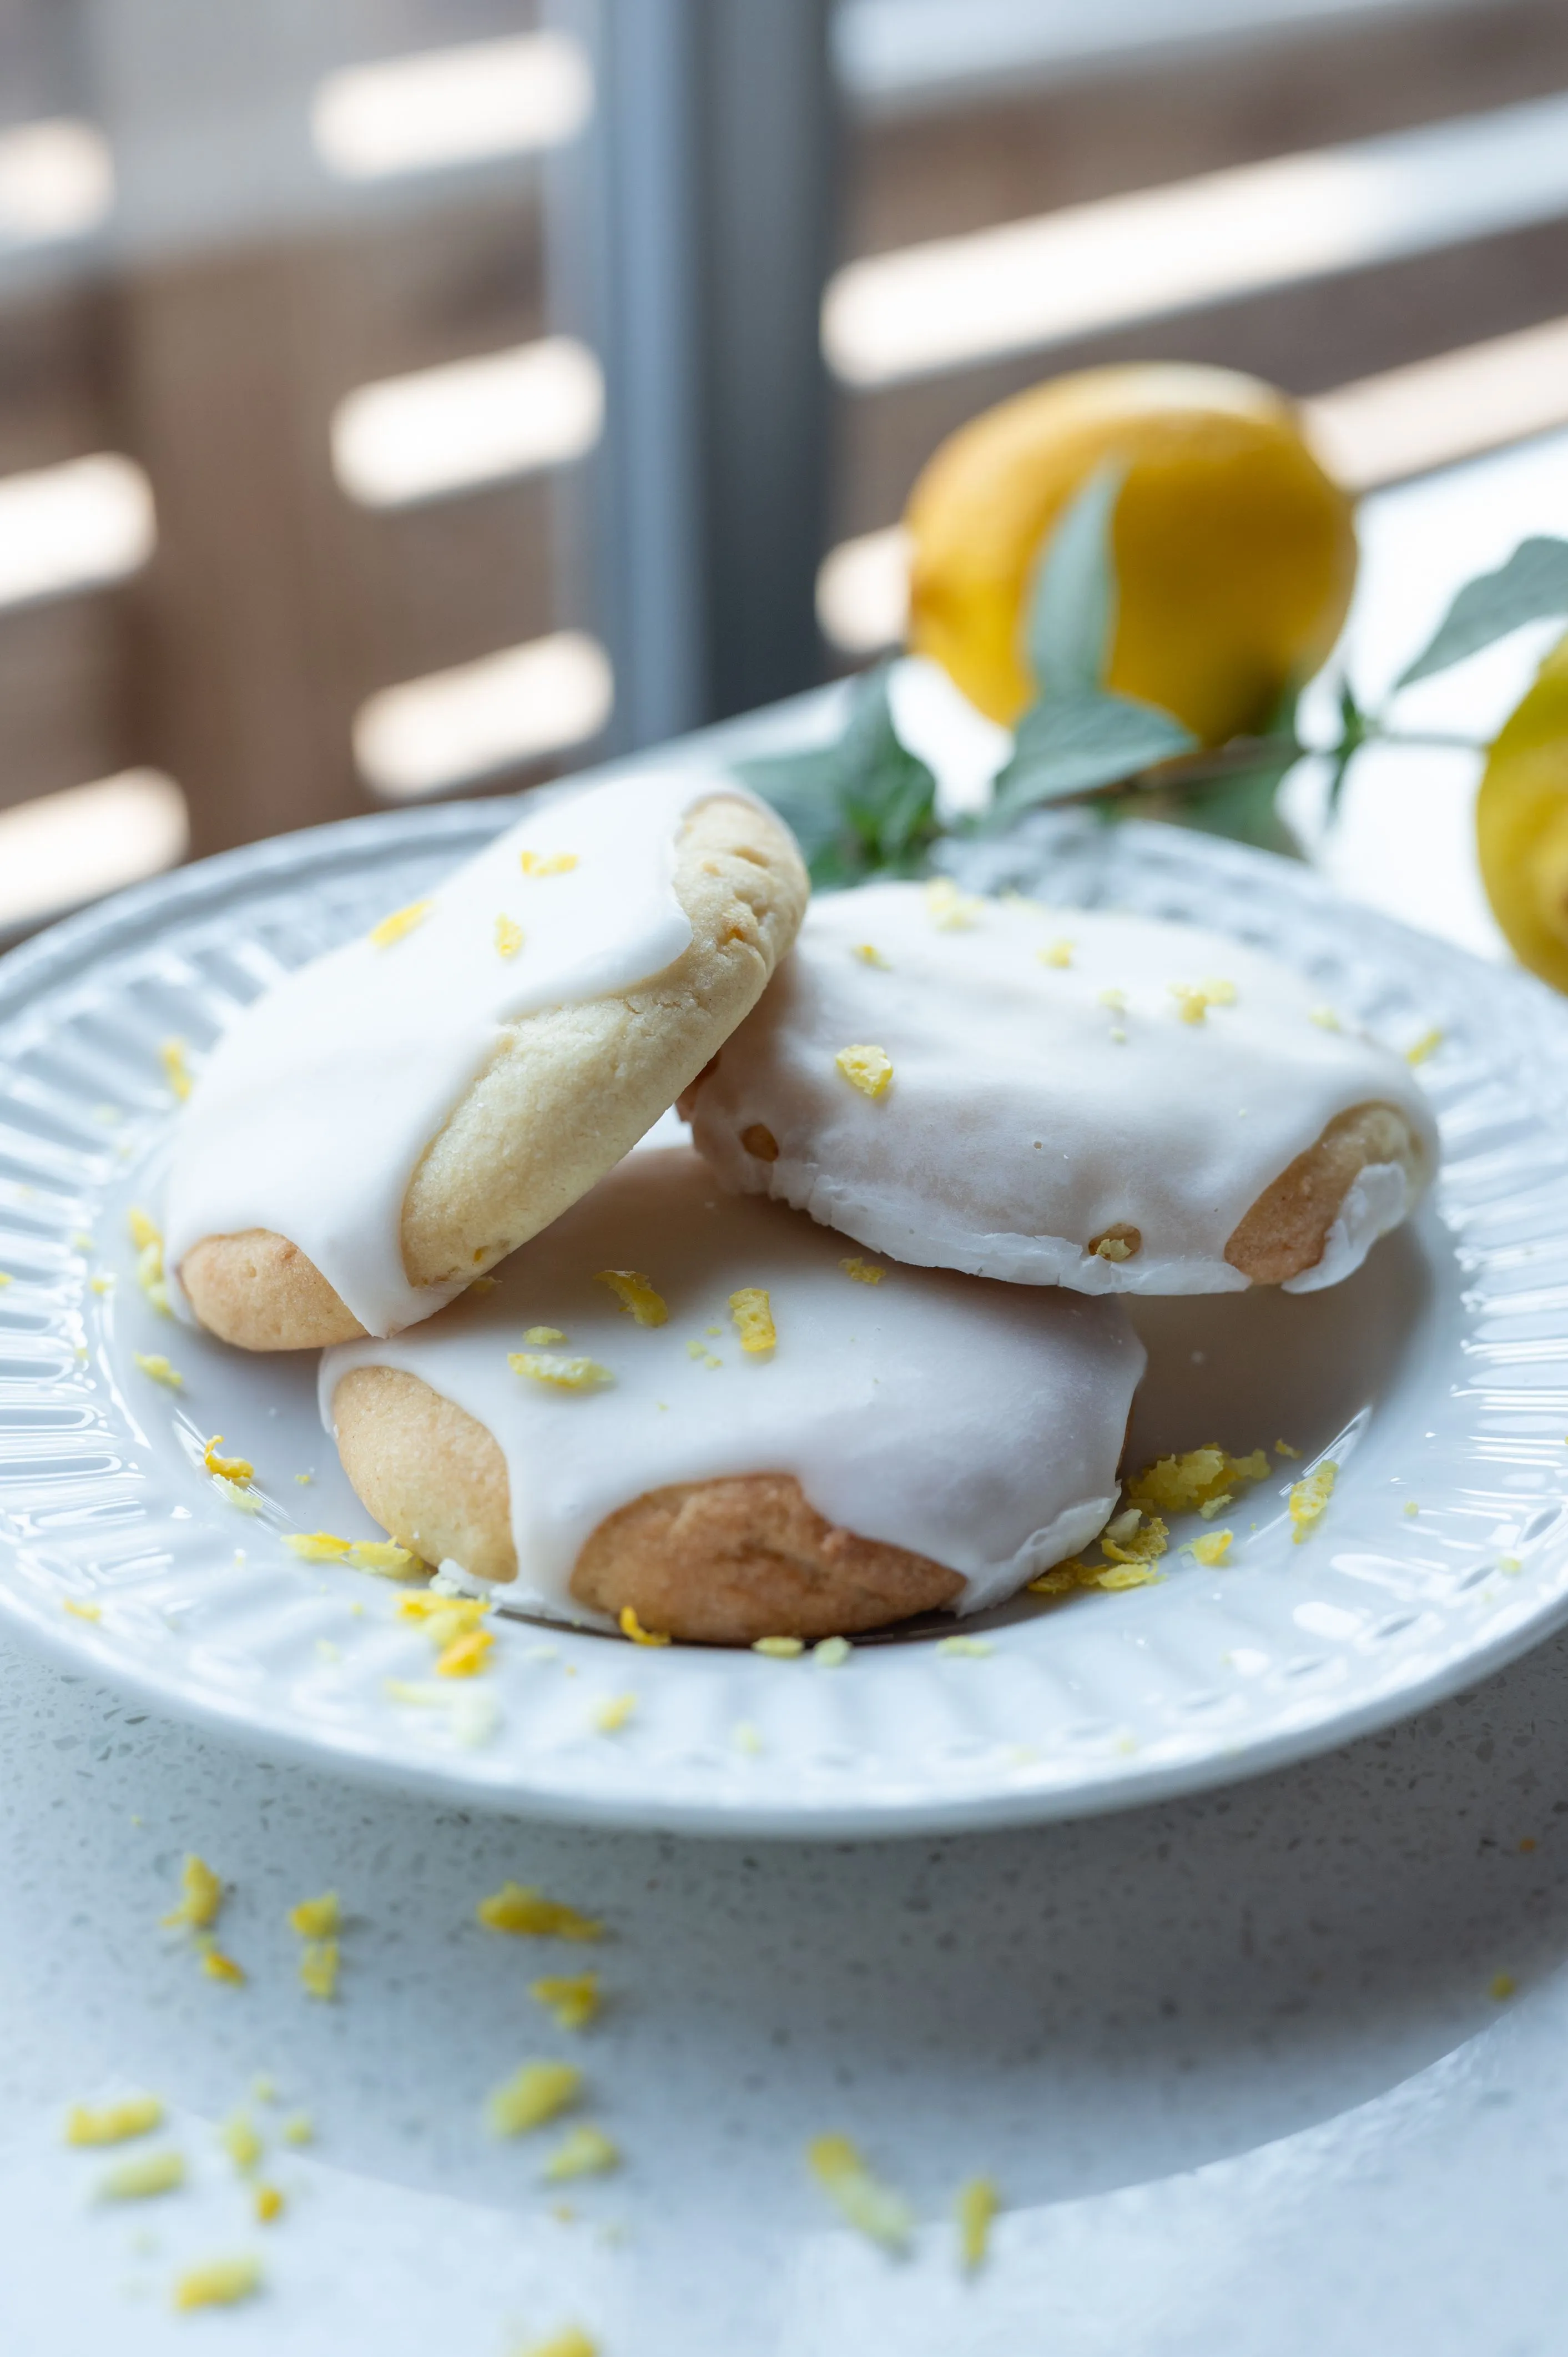 Lemon cookies with white icing on a plate, garnished with lemon zest, with lemons and leaves in the background.